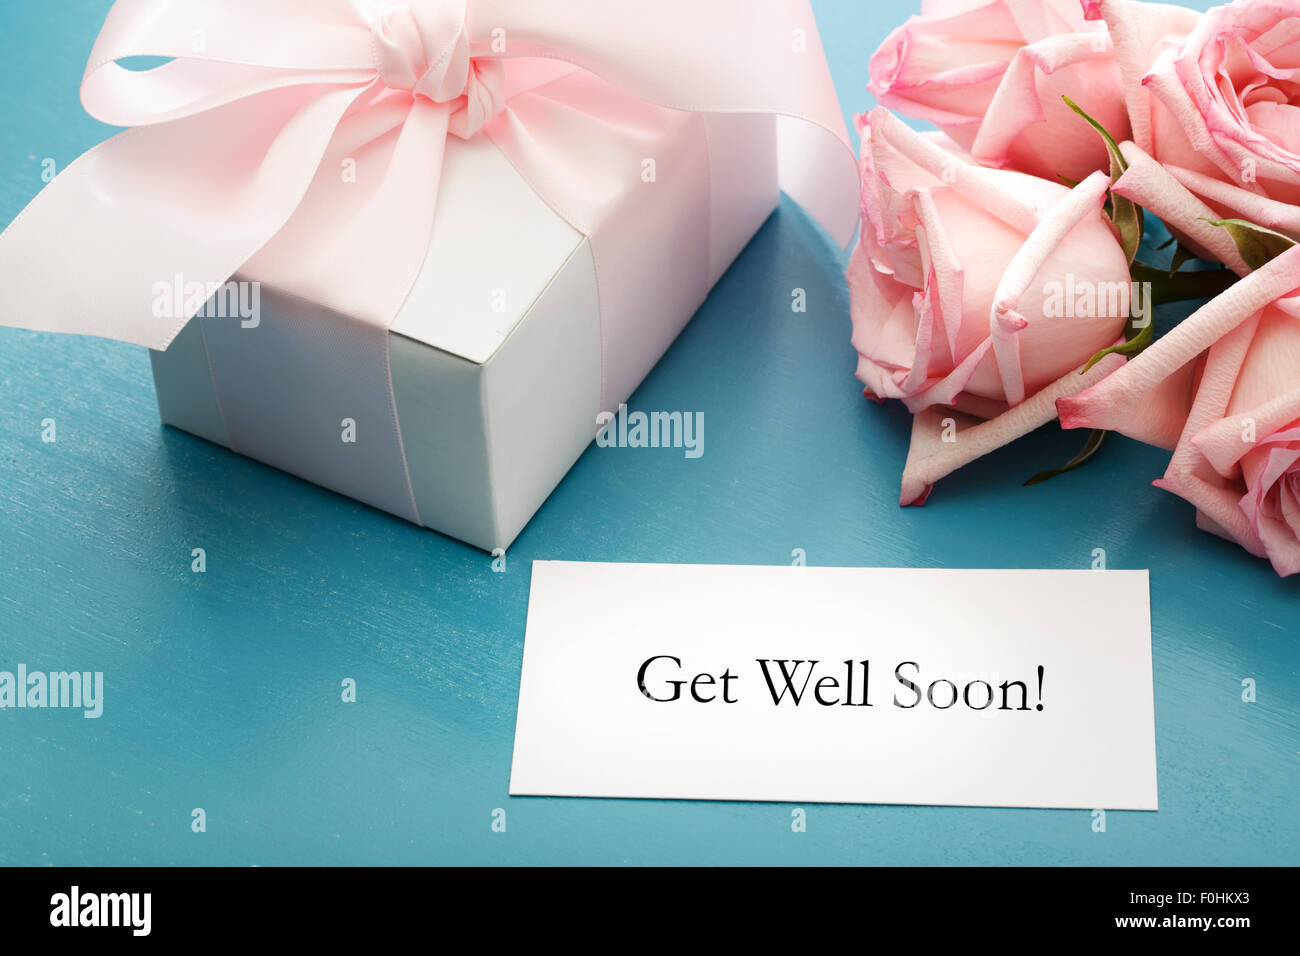 Get Well Soon card with gift box and pink roses Stock Photo